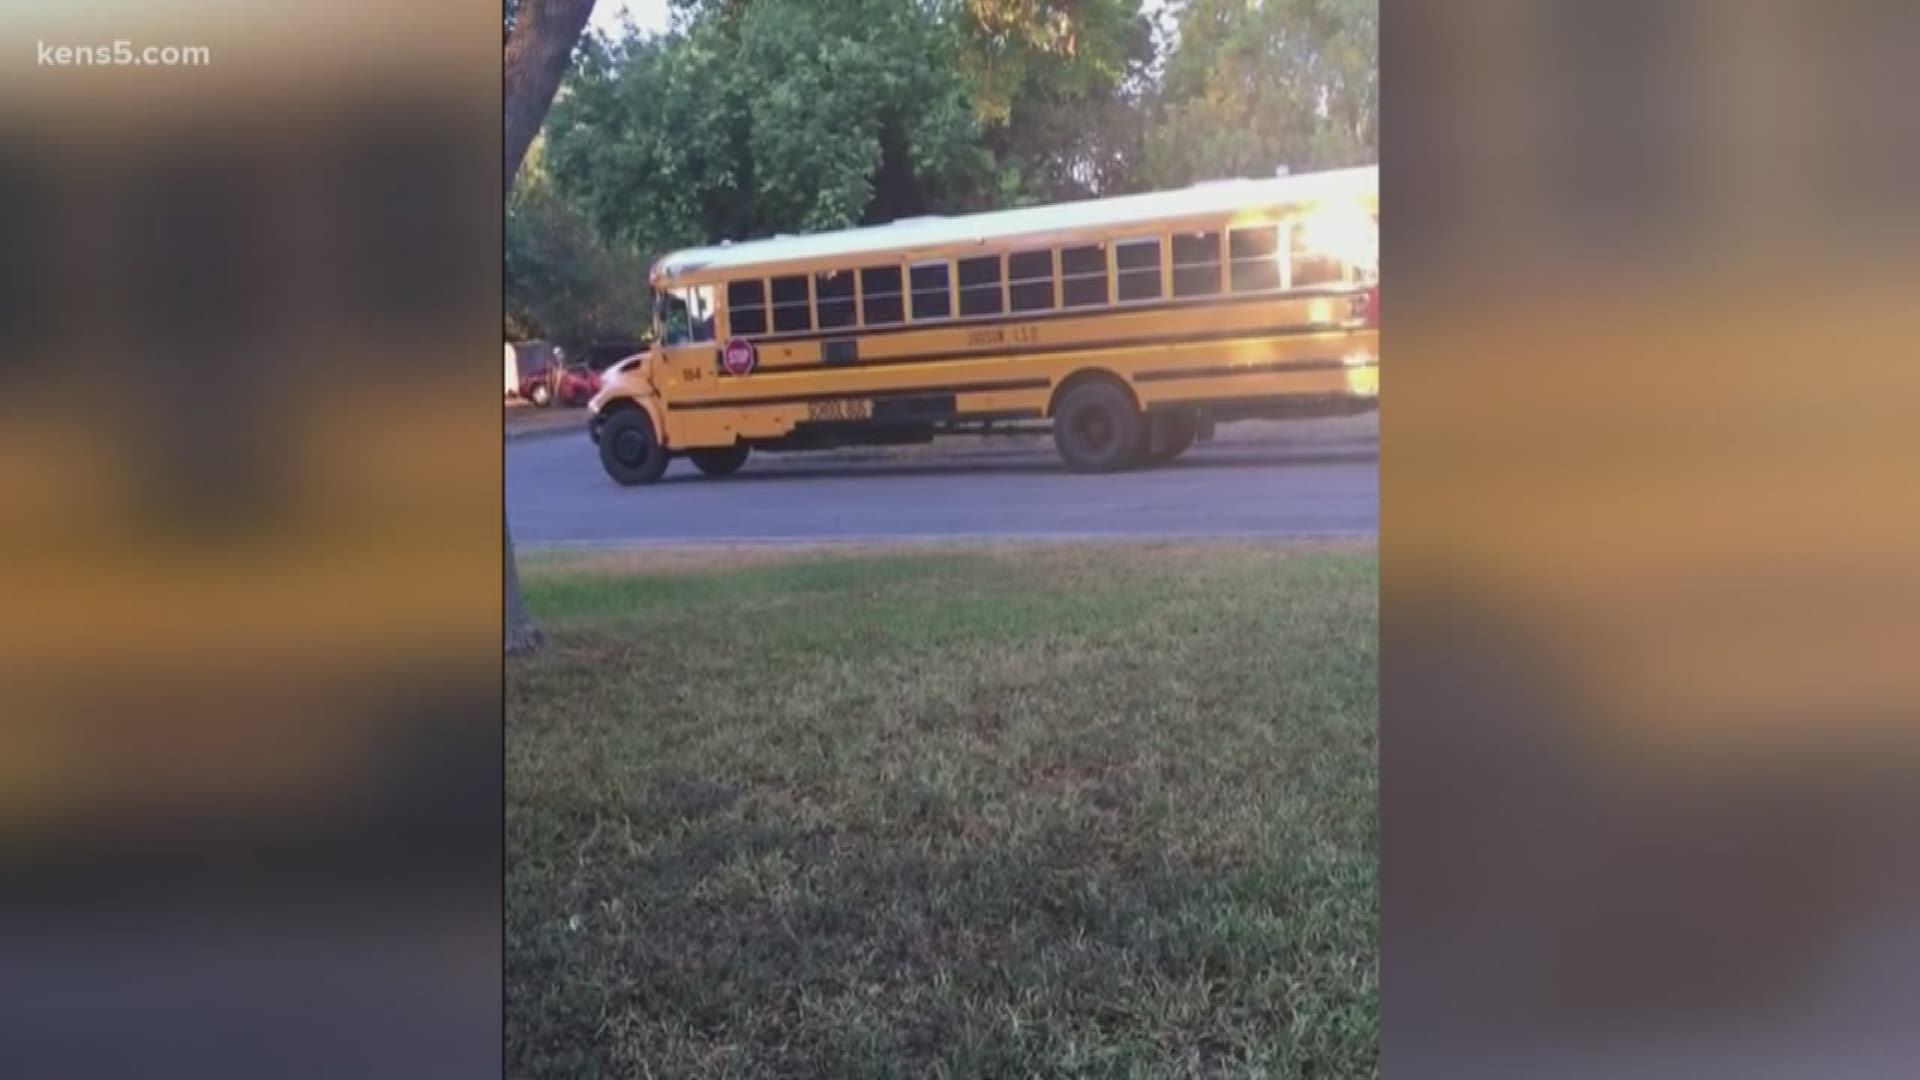 The video obtained by KENS 5 shows a bus driver from Judson ISD failing to use proper precautions while students board the bus.